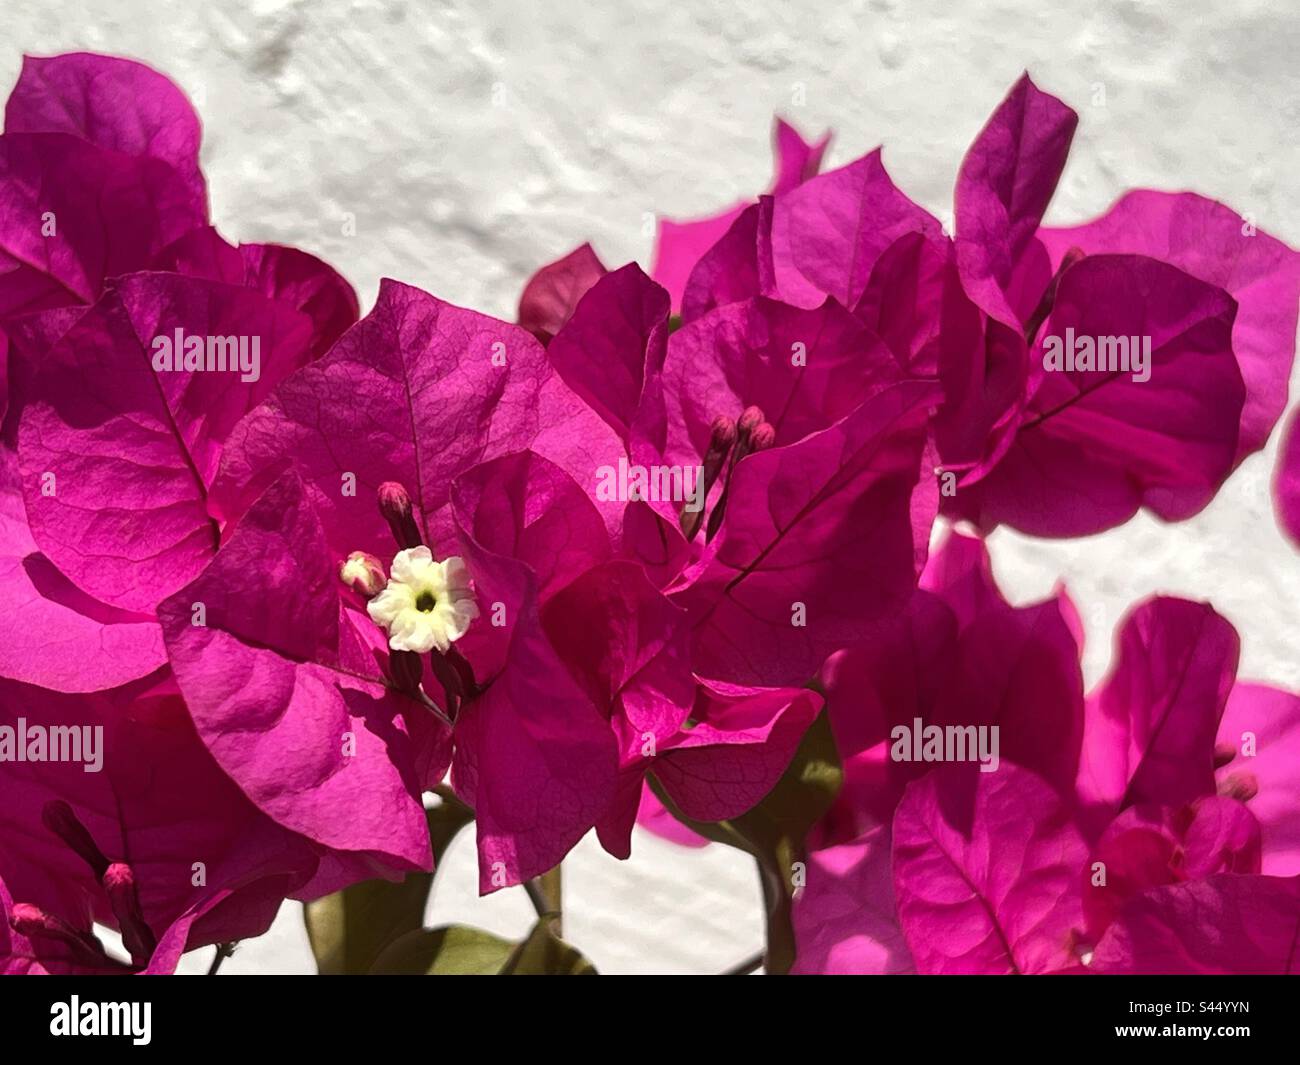 Flowering Bougainvillea shrub plant. Pink bracts against a whitewashed plaster wall Stock Photo